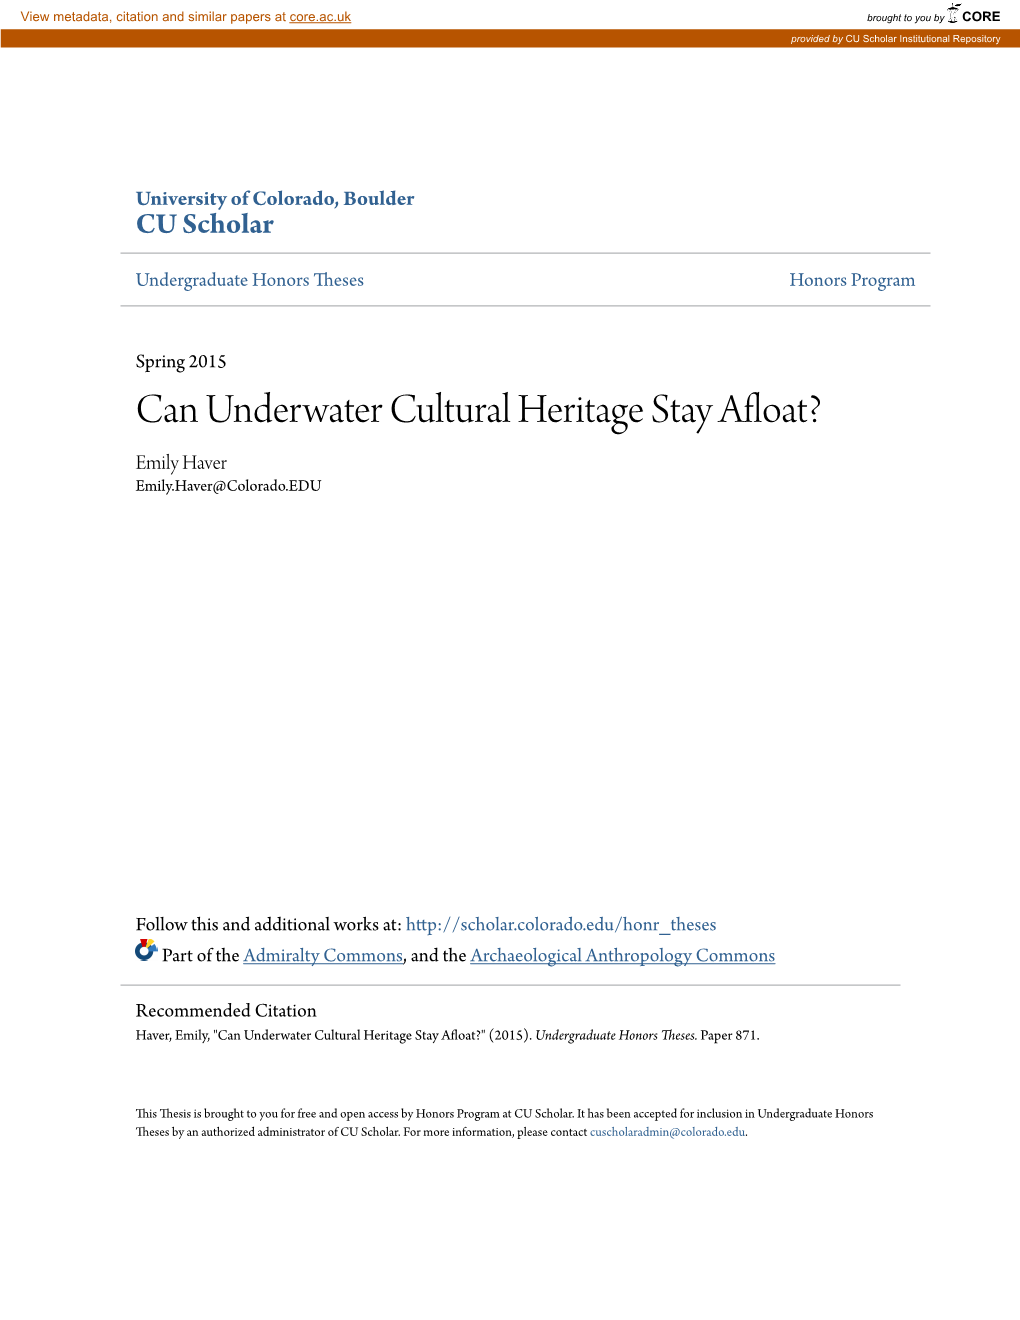 Can Underwater Cultural Heritage Stay Afloat? Emily Haver Emily.Haver@Colorado.EDU